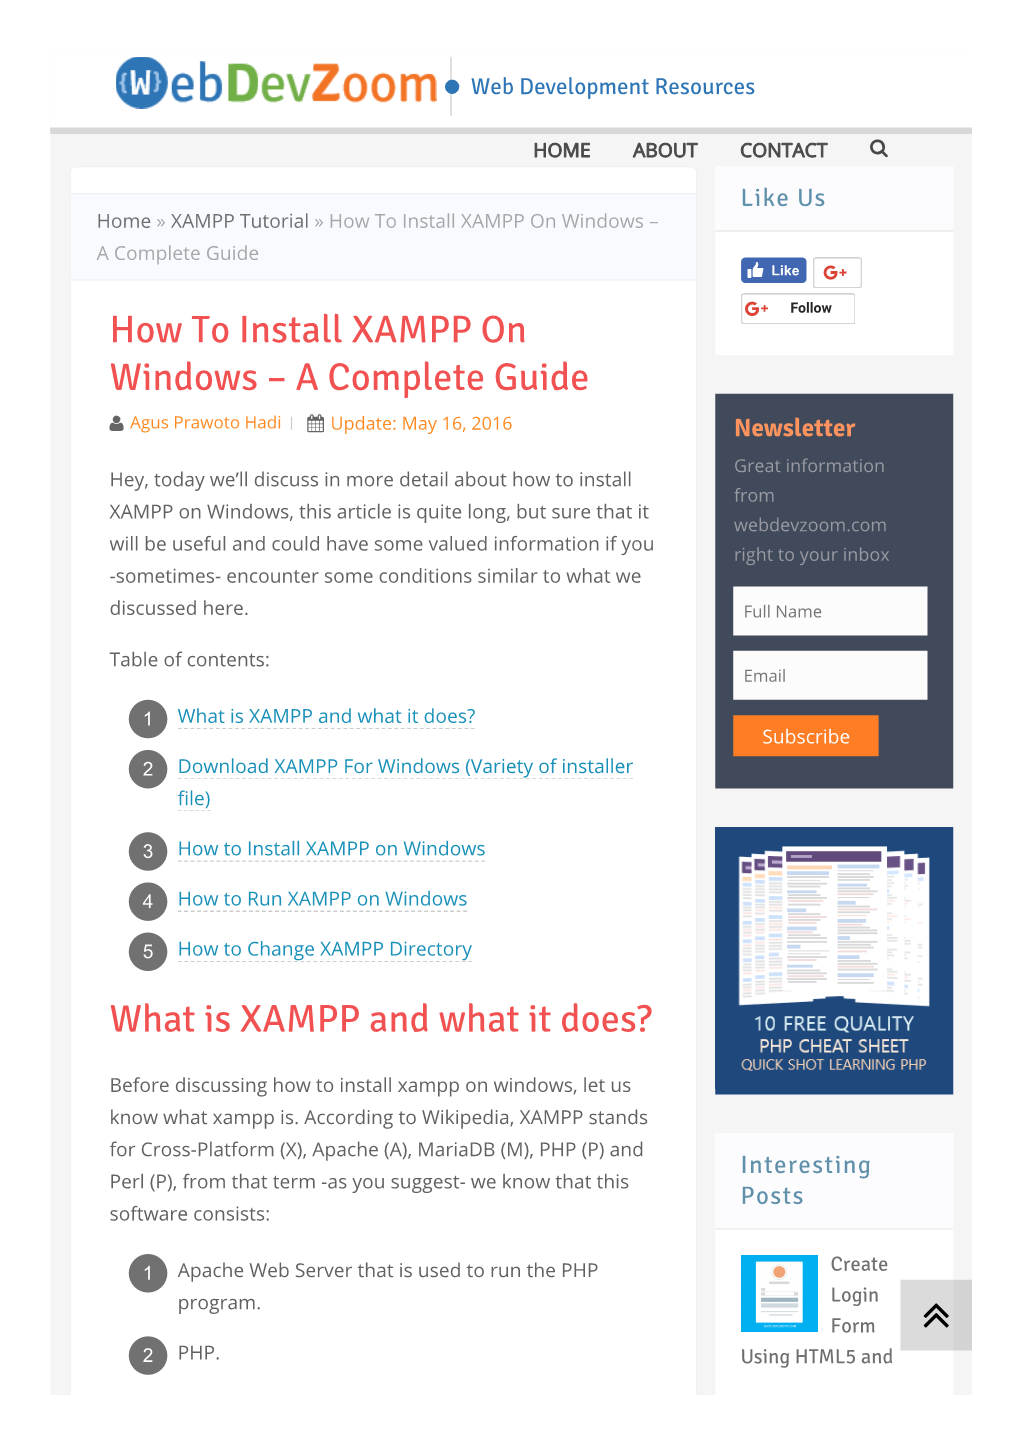 How to Install XAMPP on Windows – a Complete Guide Like